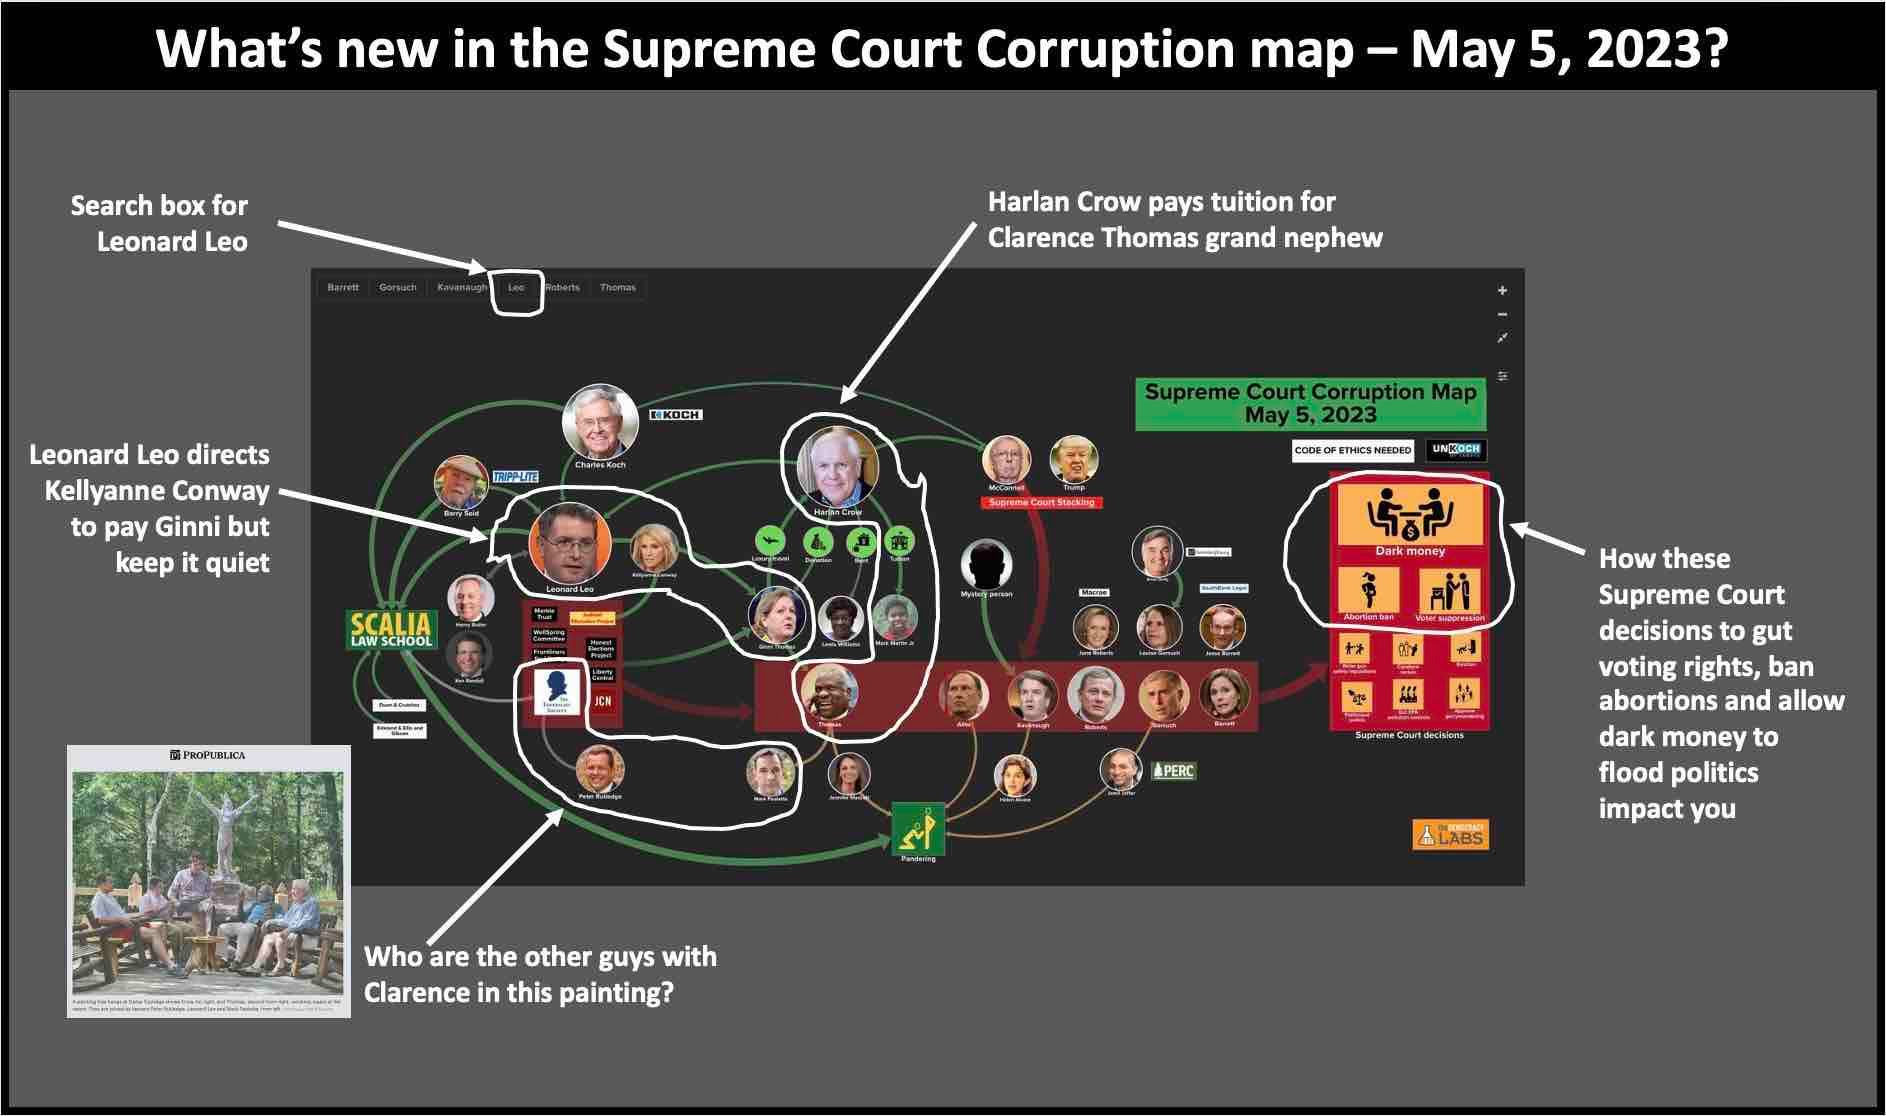 Supreme Court Corruption map May 5, 2023